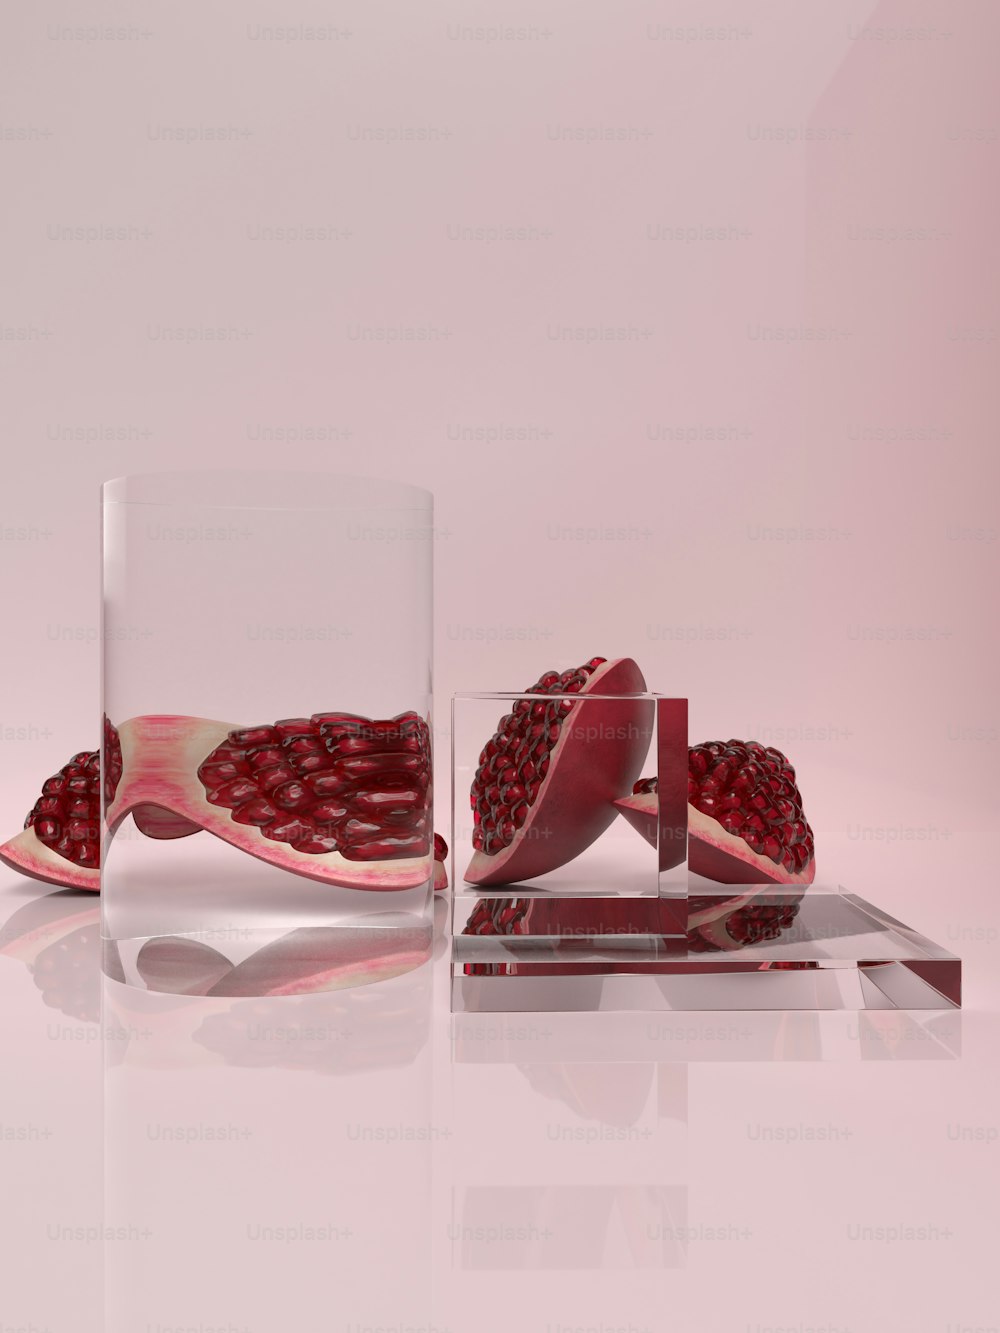 a glass with some red objects inside of it